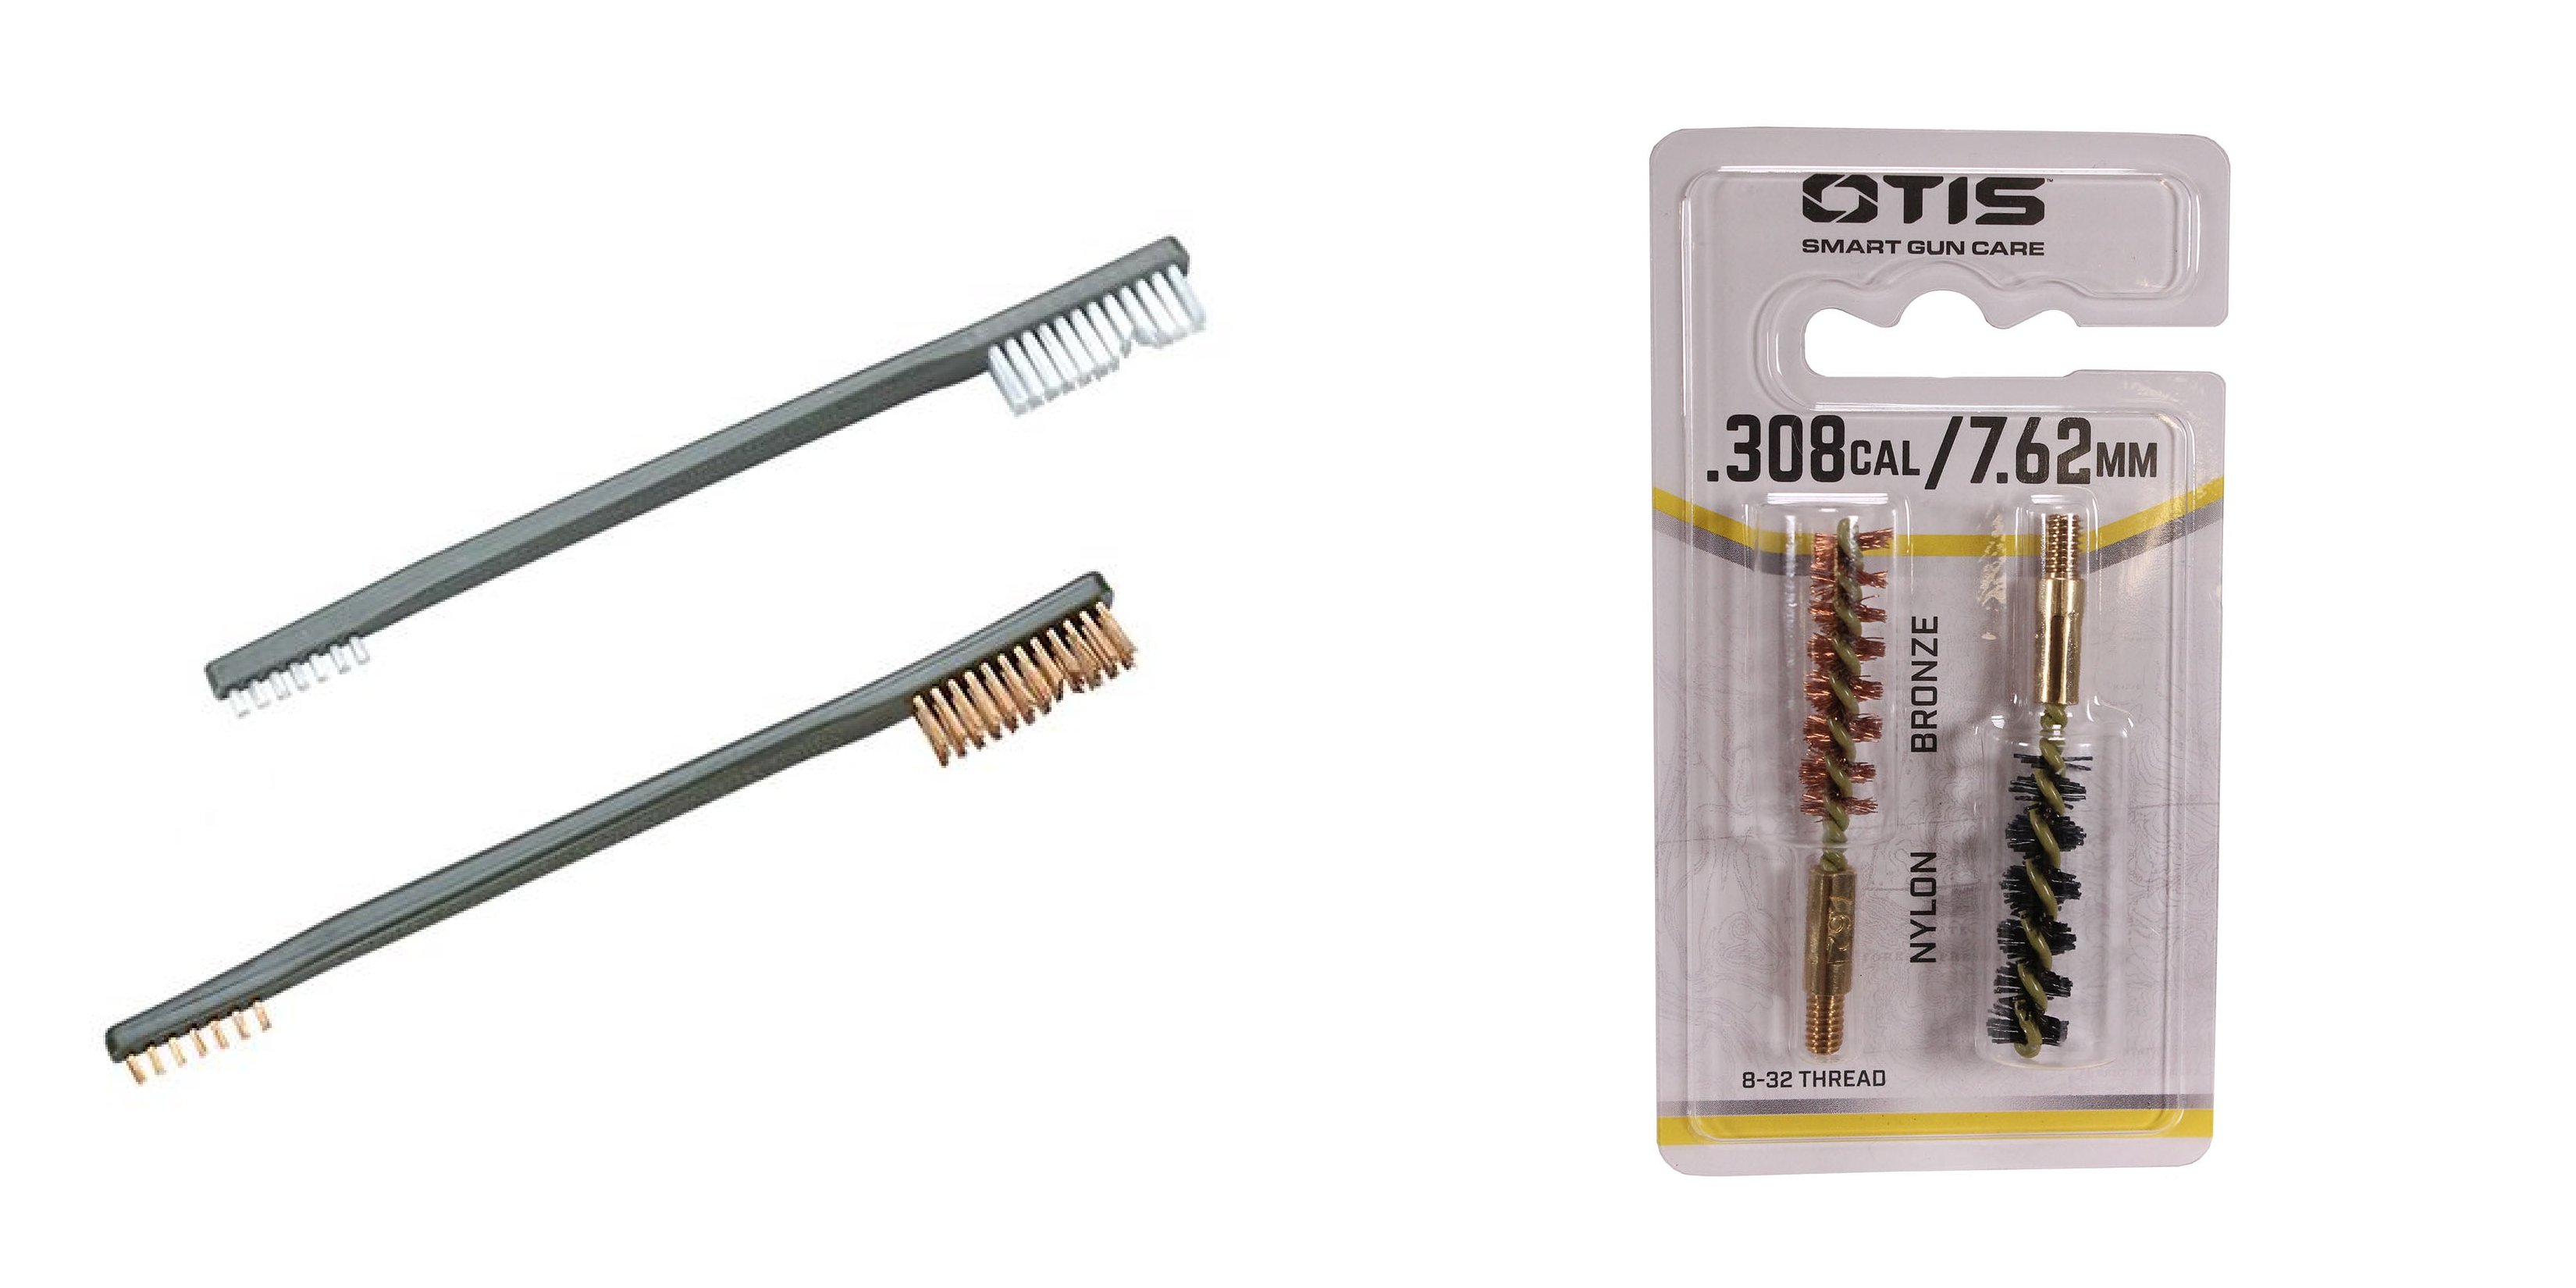 Nylon Bore Brushes  Buy a 3-Pack of Nylon Brushes for Gun Cleaning - Bore  Tech